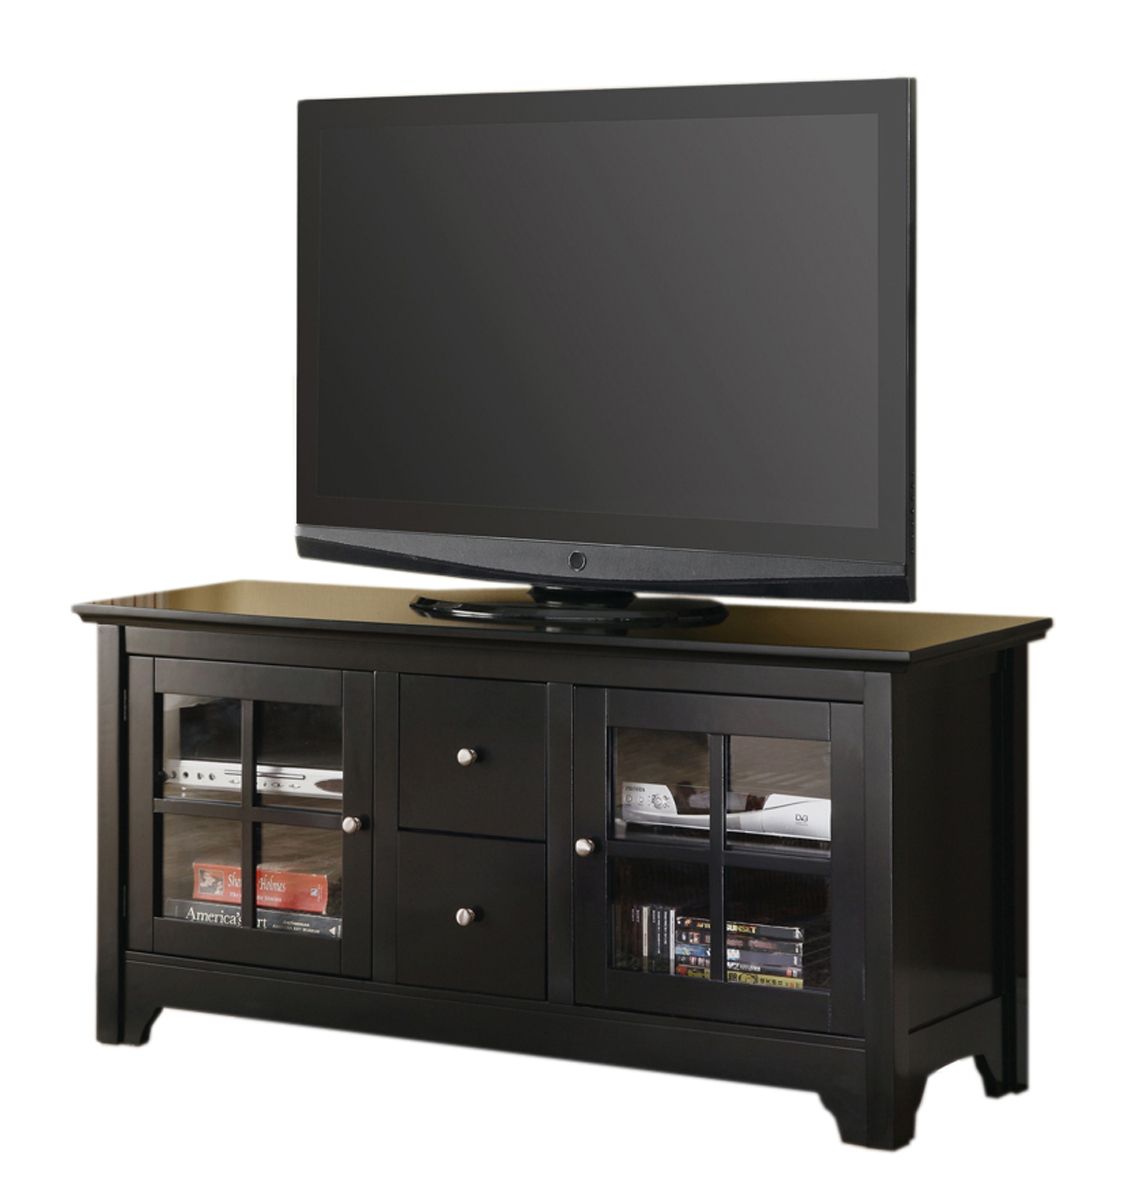 52 Inch Wood Tv Stand With Drawers And Glass Doors With Regard To Oak Tv Stands With Glass Doors (View 14 of 15)